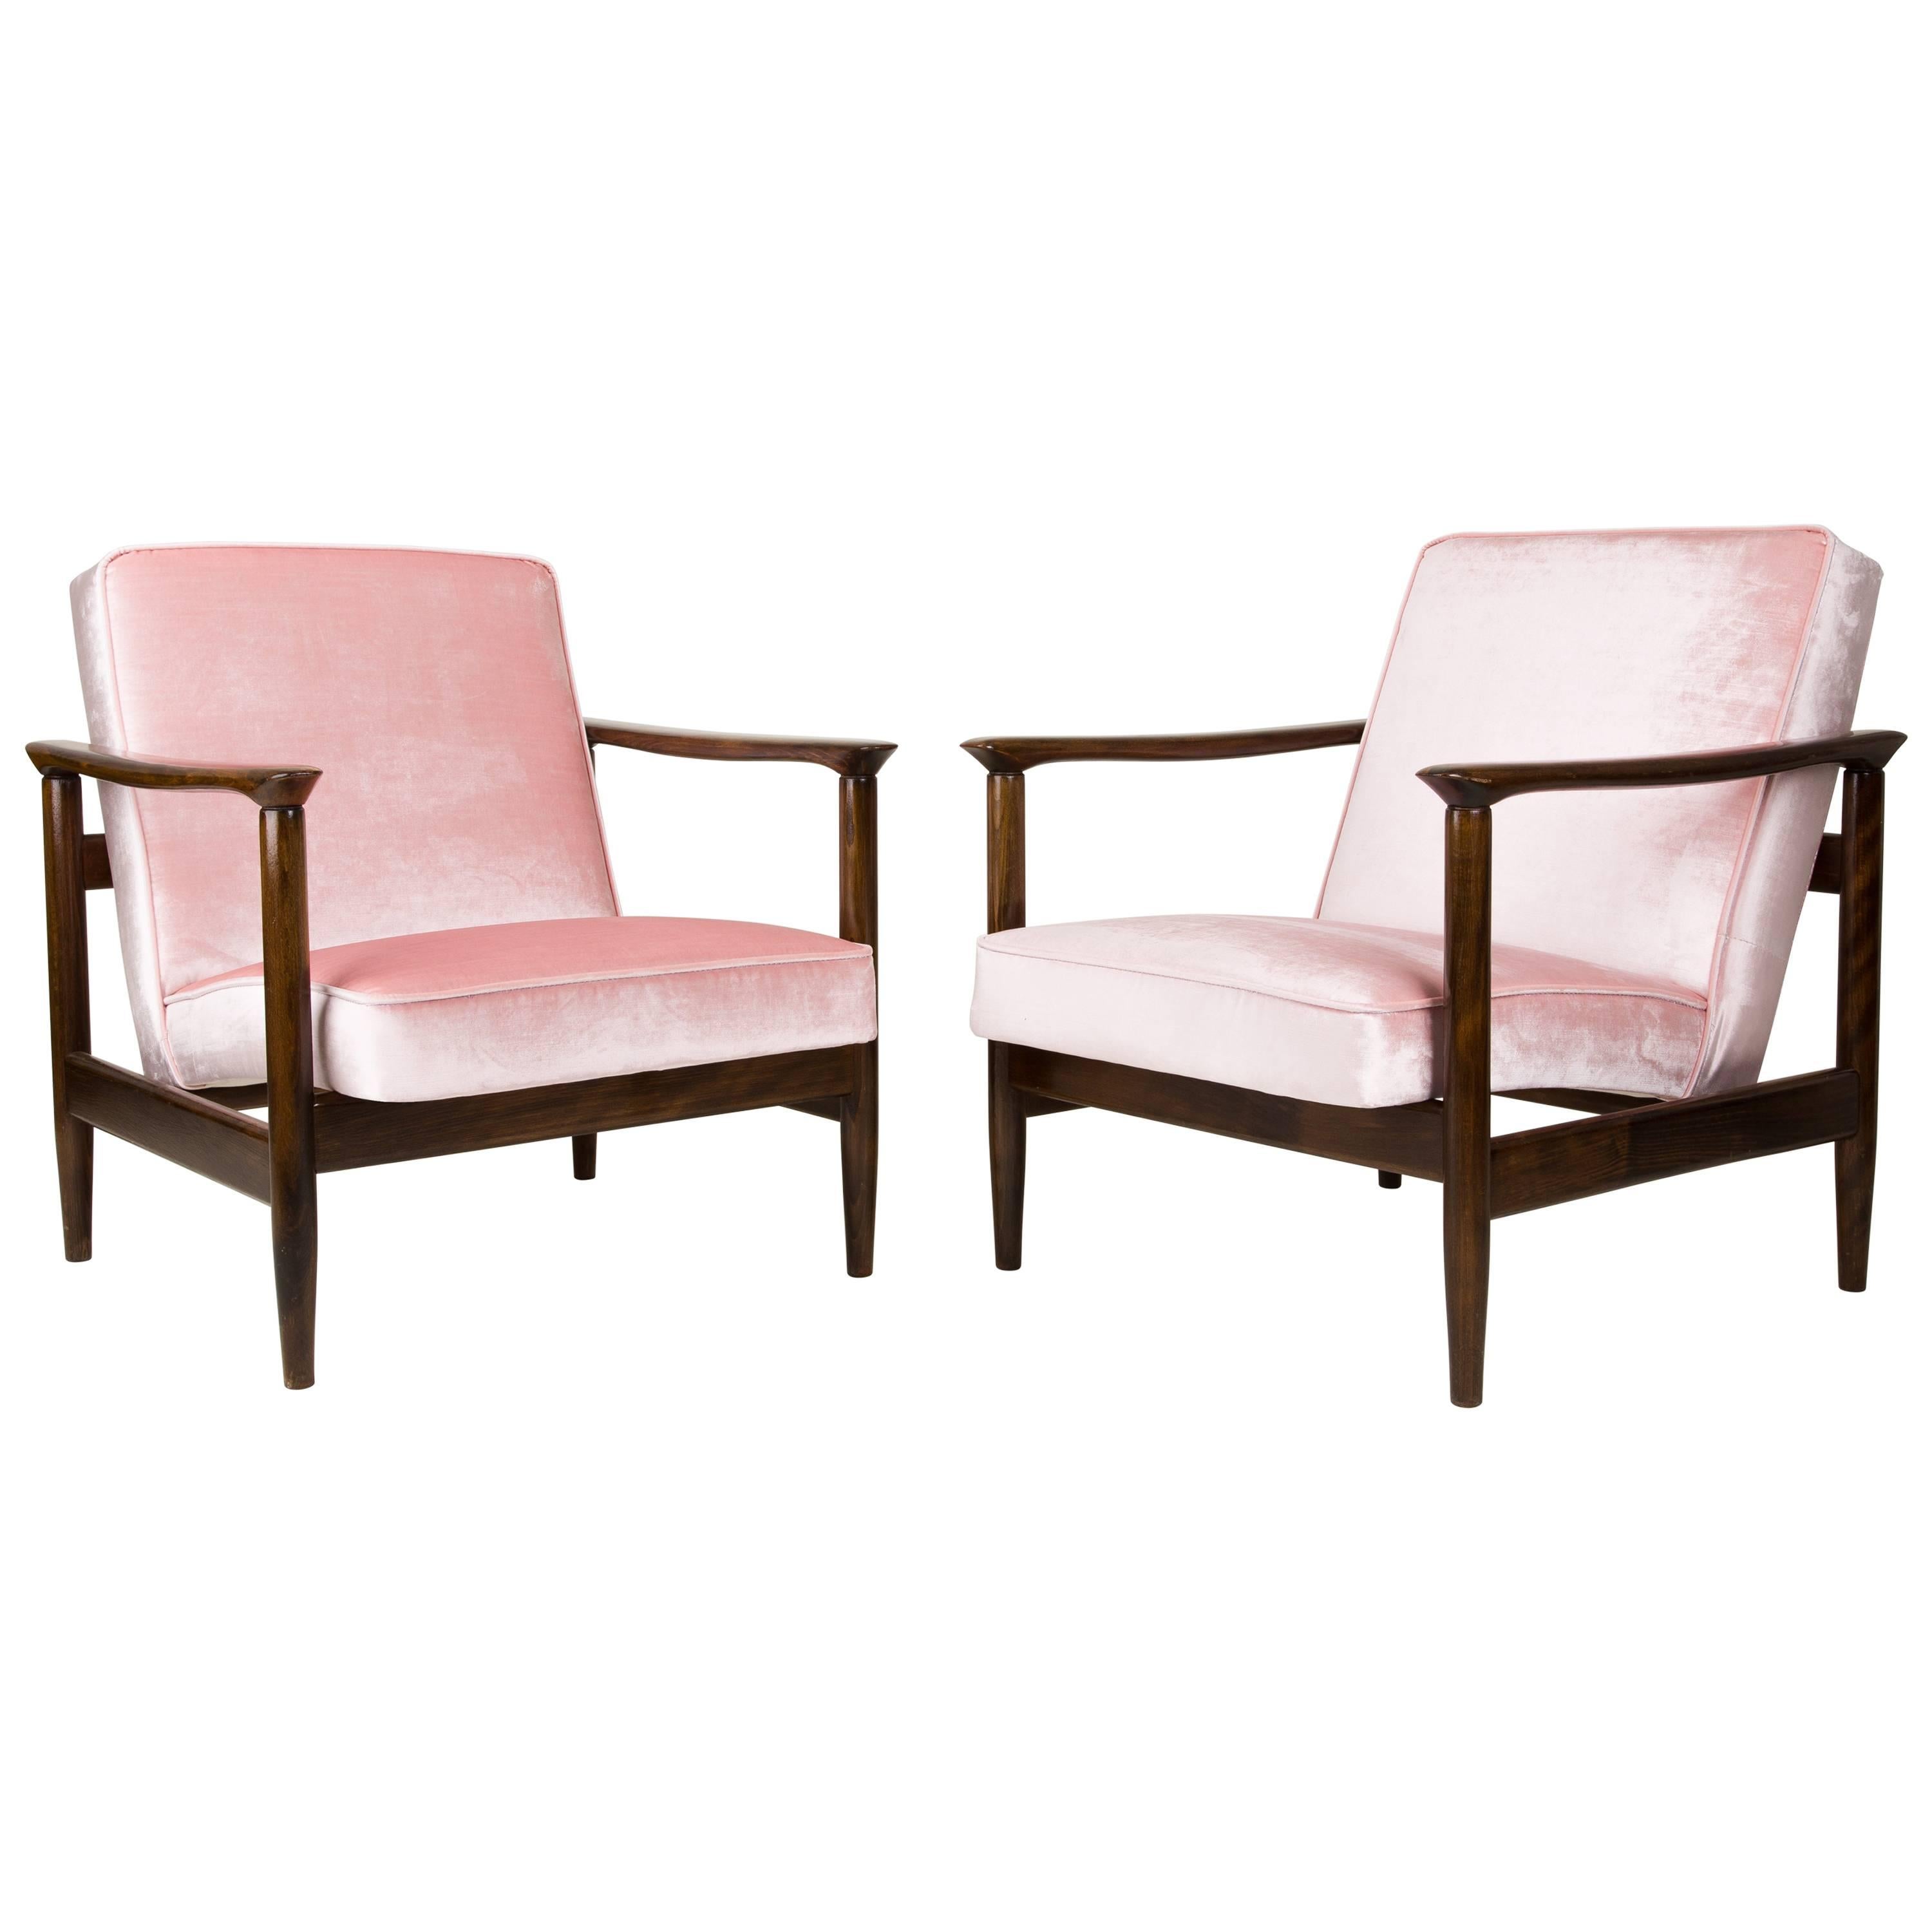 Pair of Baby Pink Velvet Armchairs, Designed by Edmund Homa, 1960s For Sale